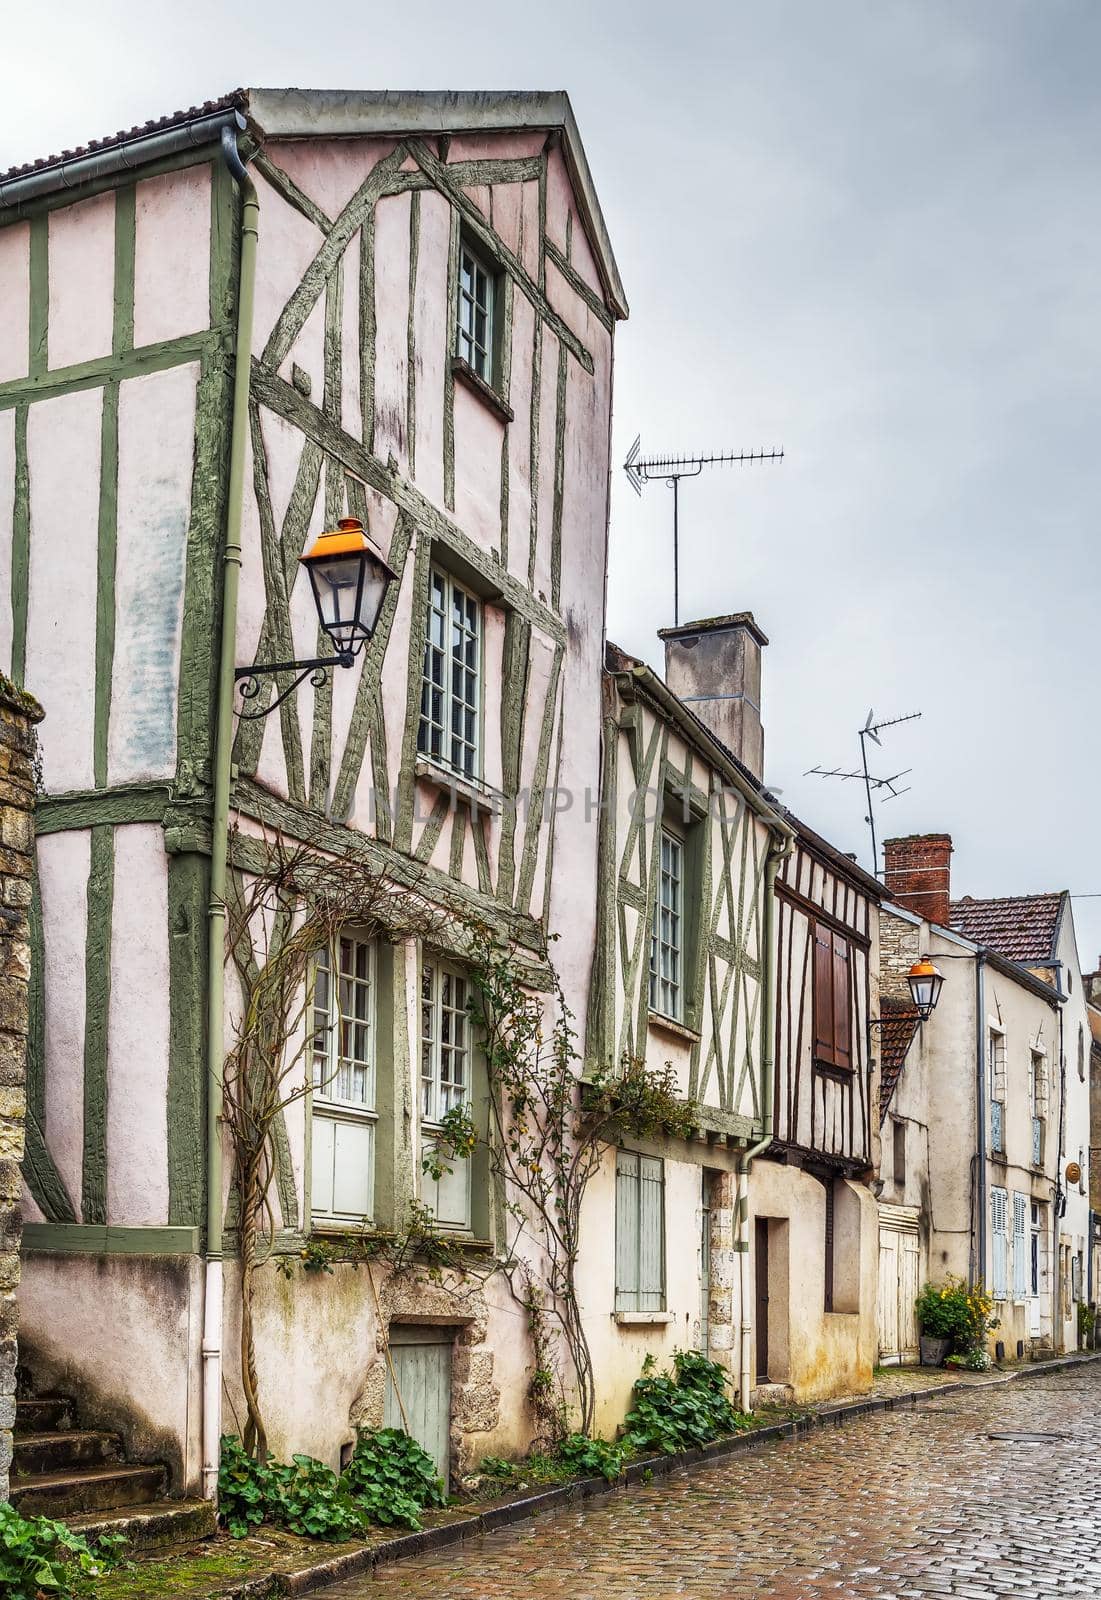 Street with historical half-timbered houses in Noyers (Noyers-sur-Serein), Yonne, France